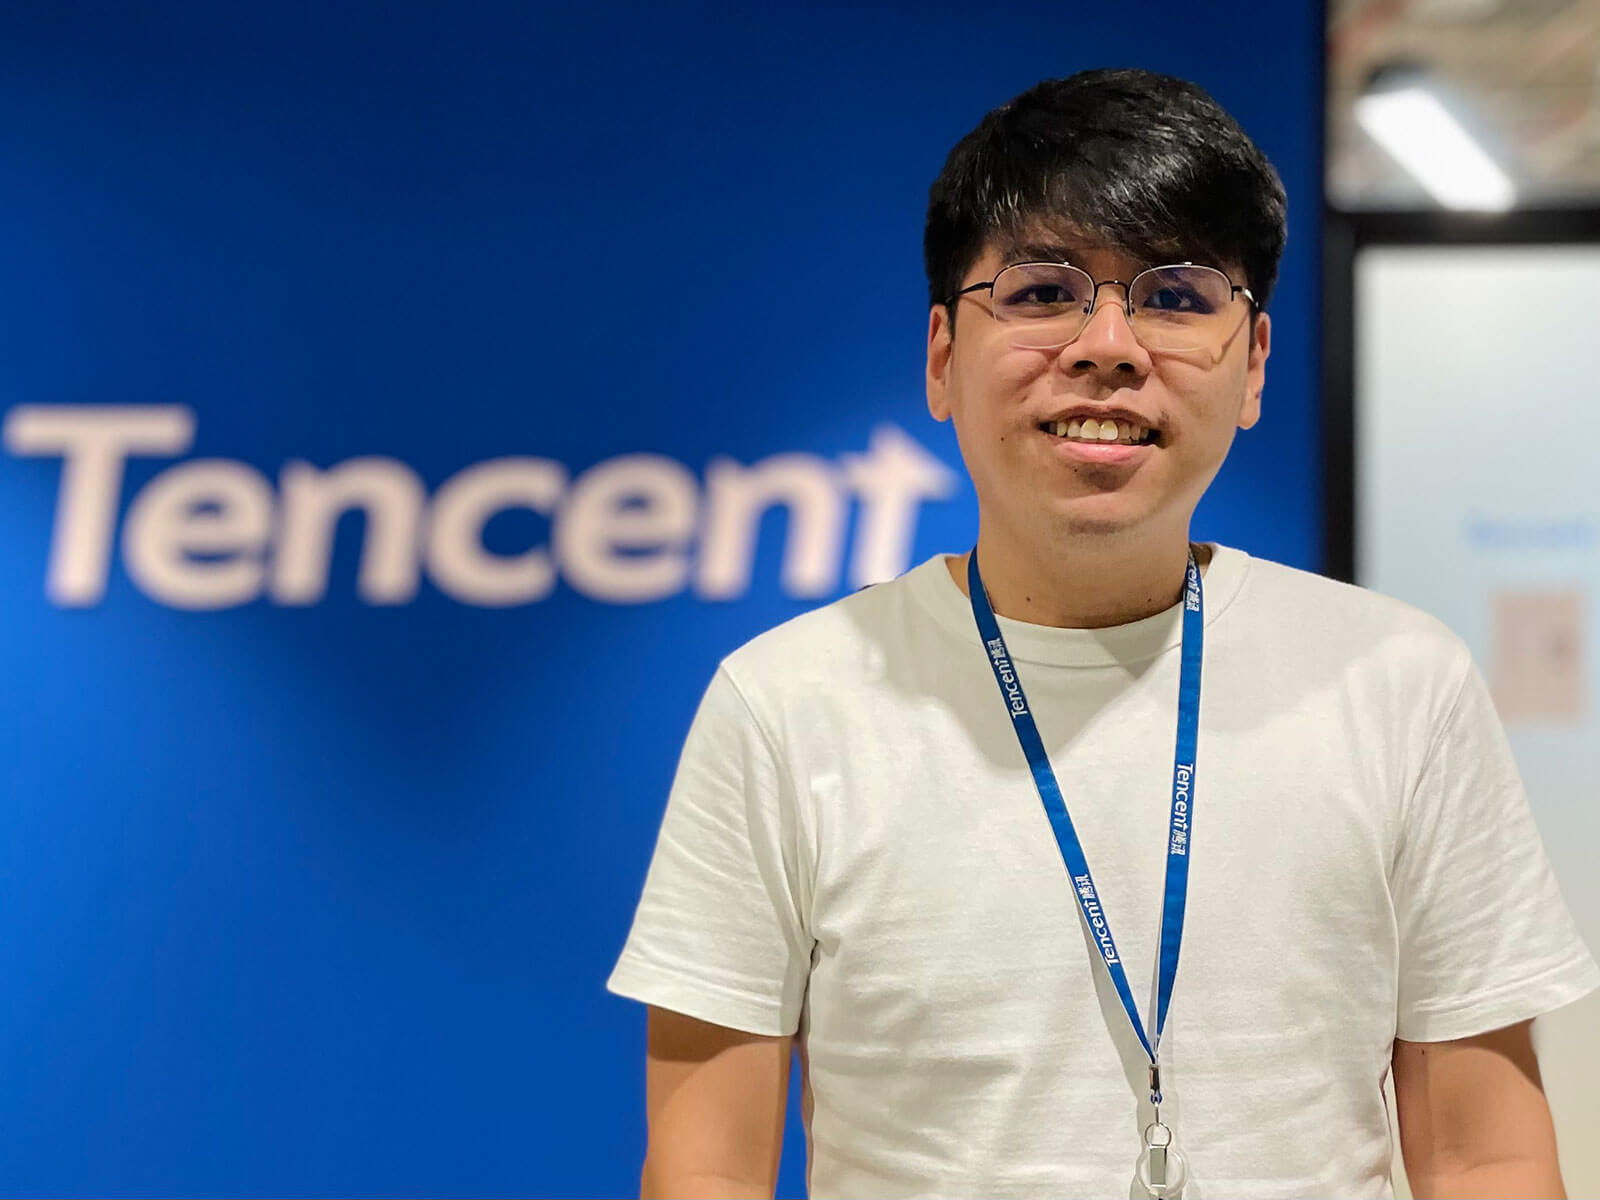 Alumni Mandl Cho stands in front of a blue wall with the Tencent logo on it